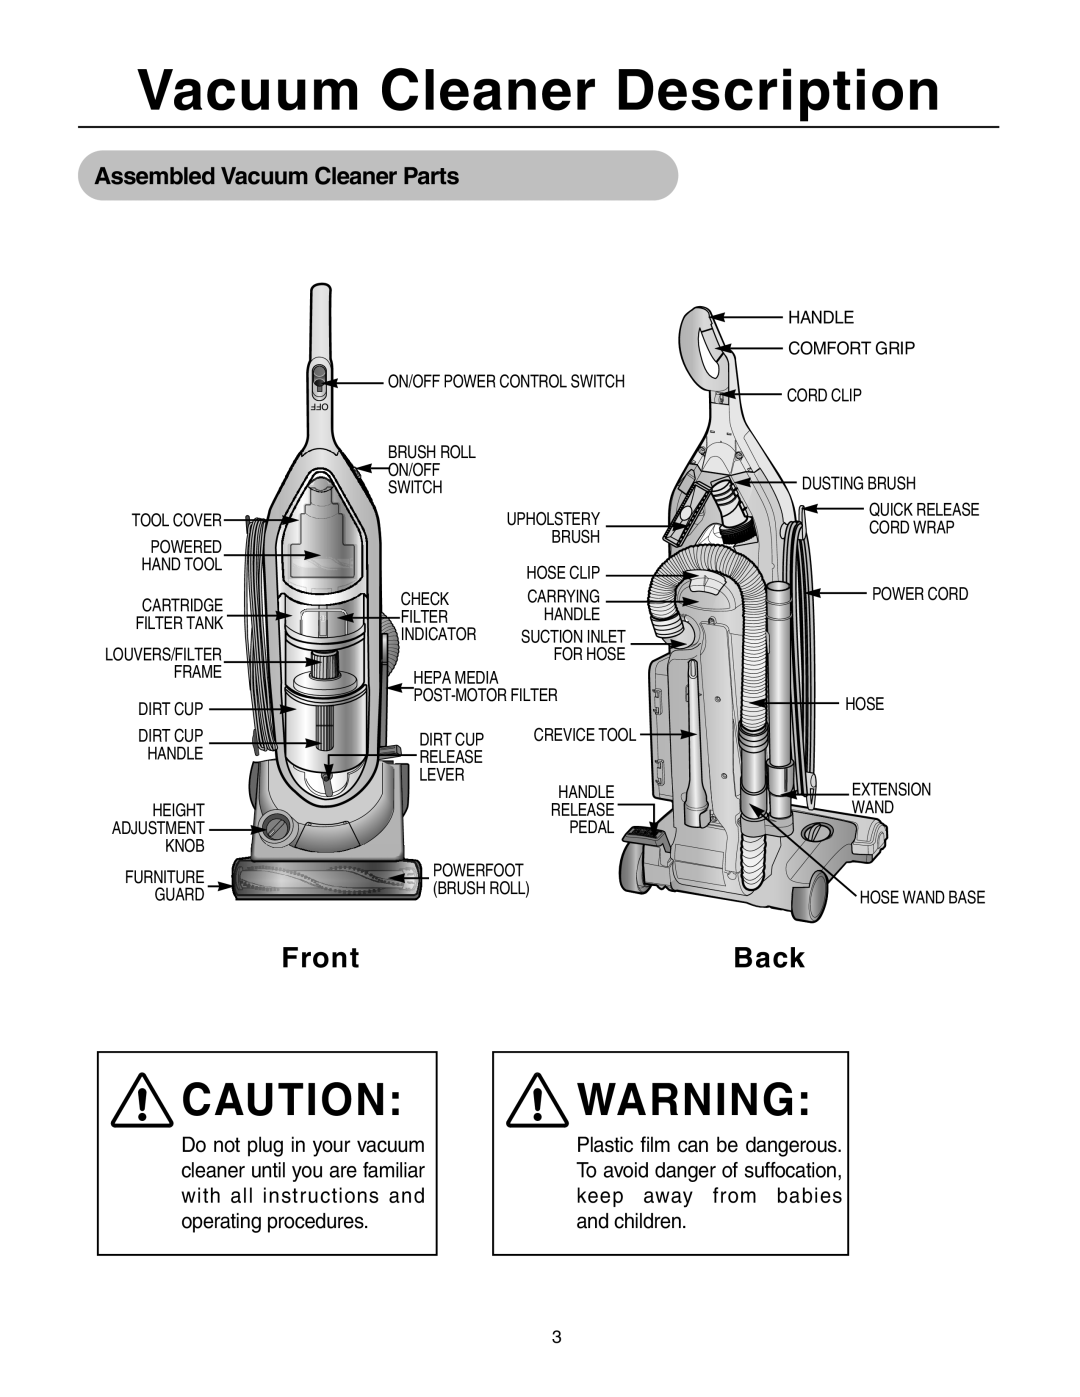 Samsung SU-8500 operating instructions Vacuum Cleaner Description, Front, Back, Assembled Vacuum Cleaner Parts 